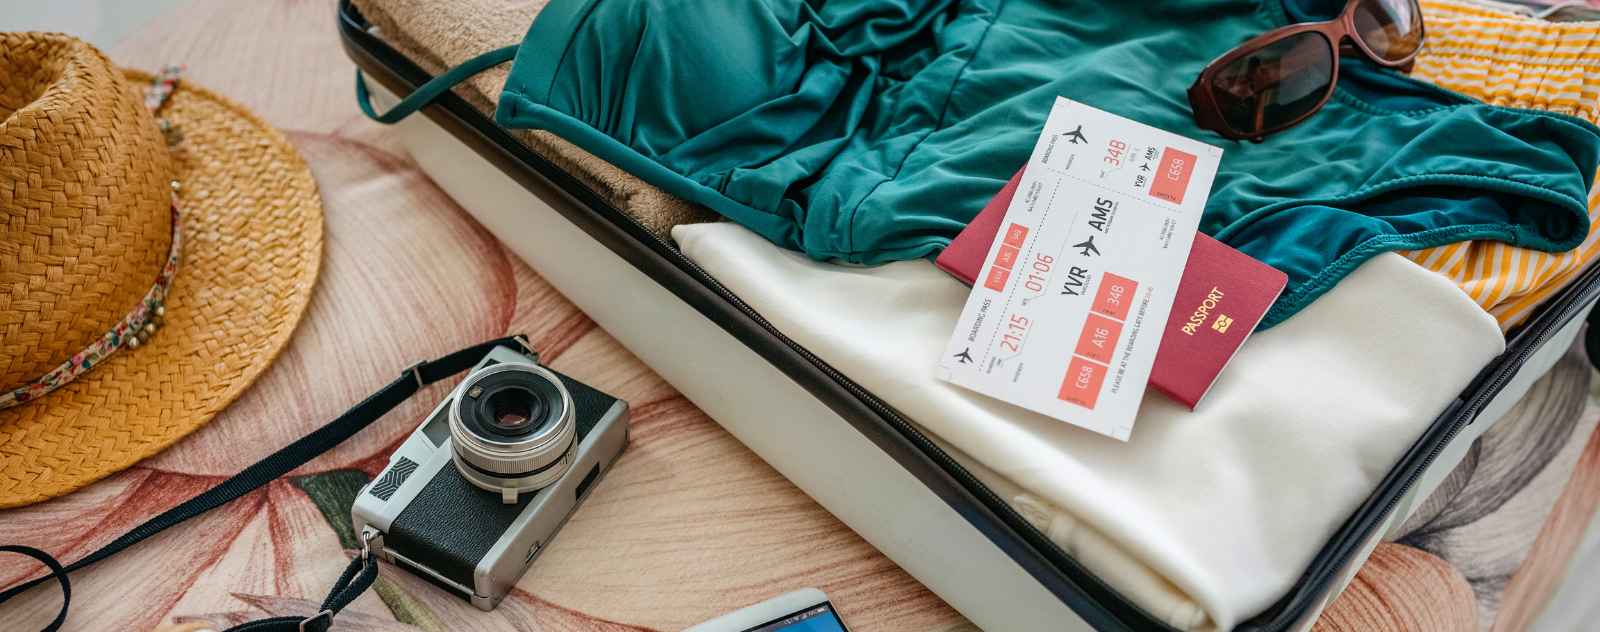 From Comfort to Safety: Top Travel Must-Haves You Can't Leave Home Without